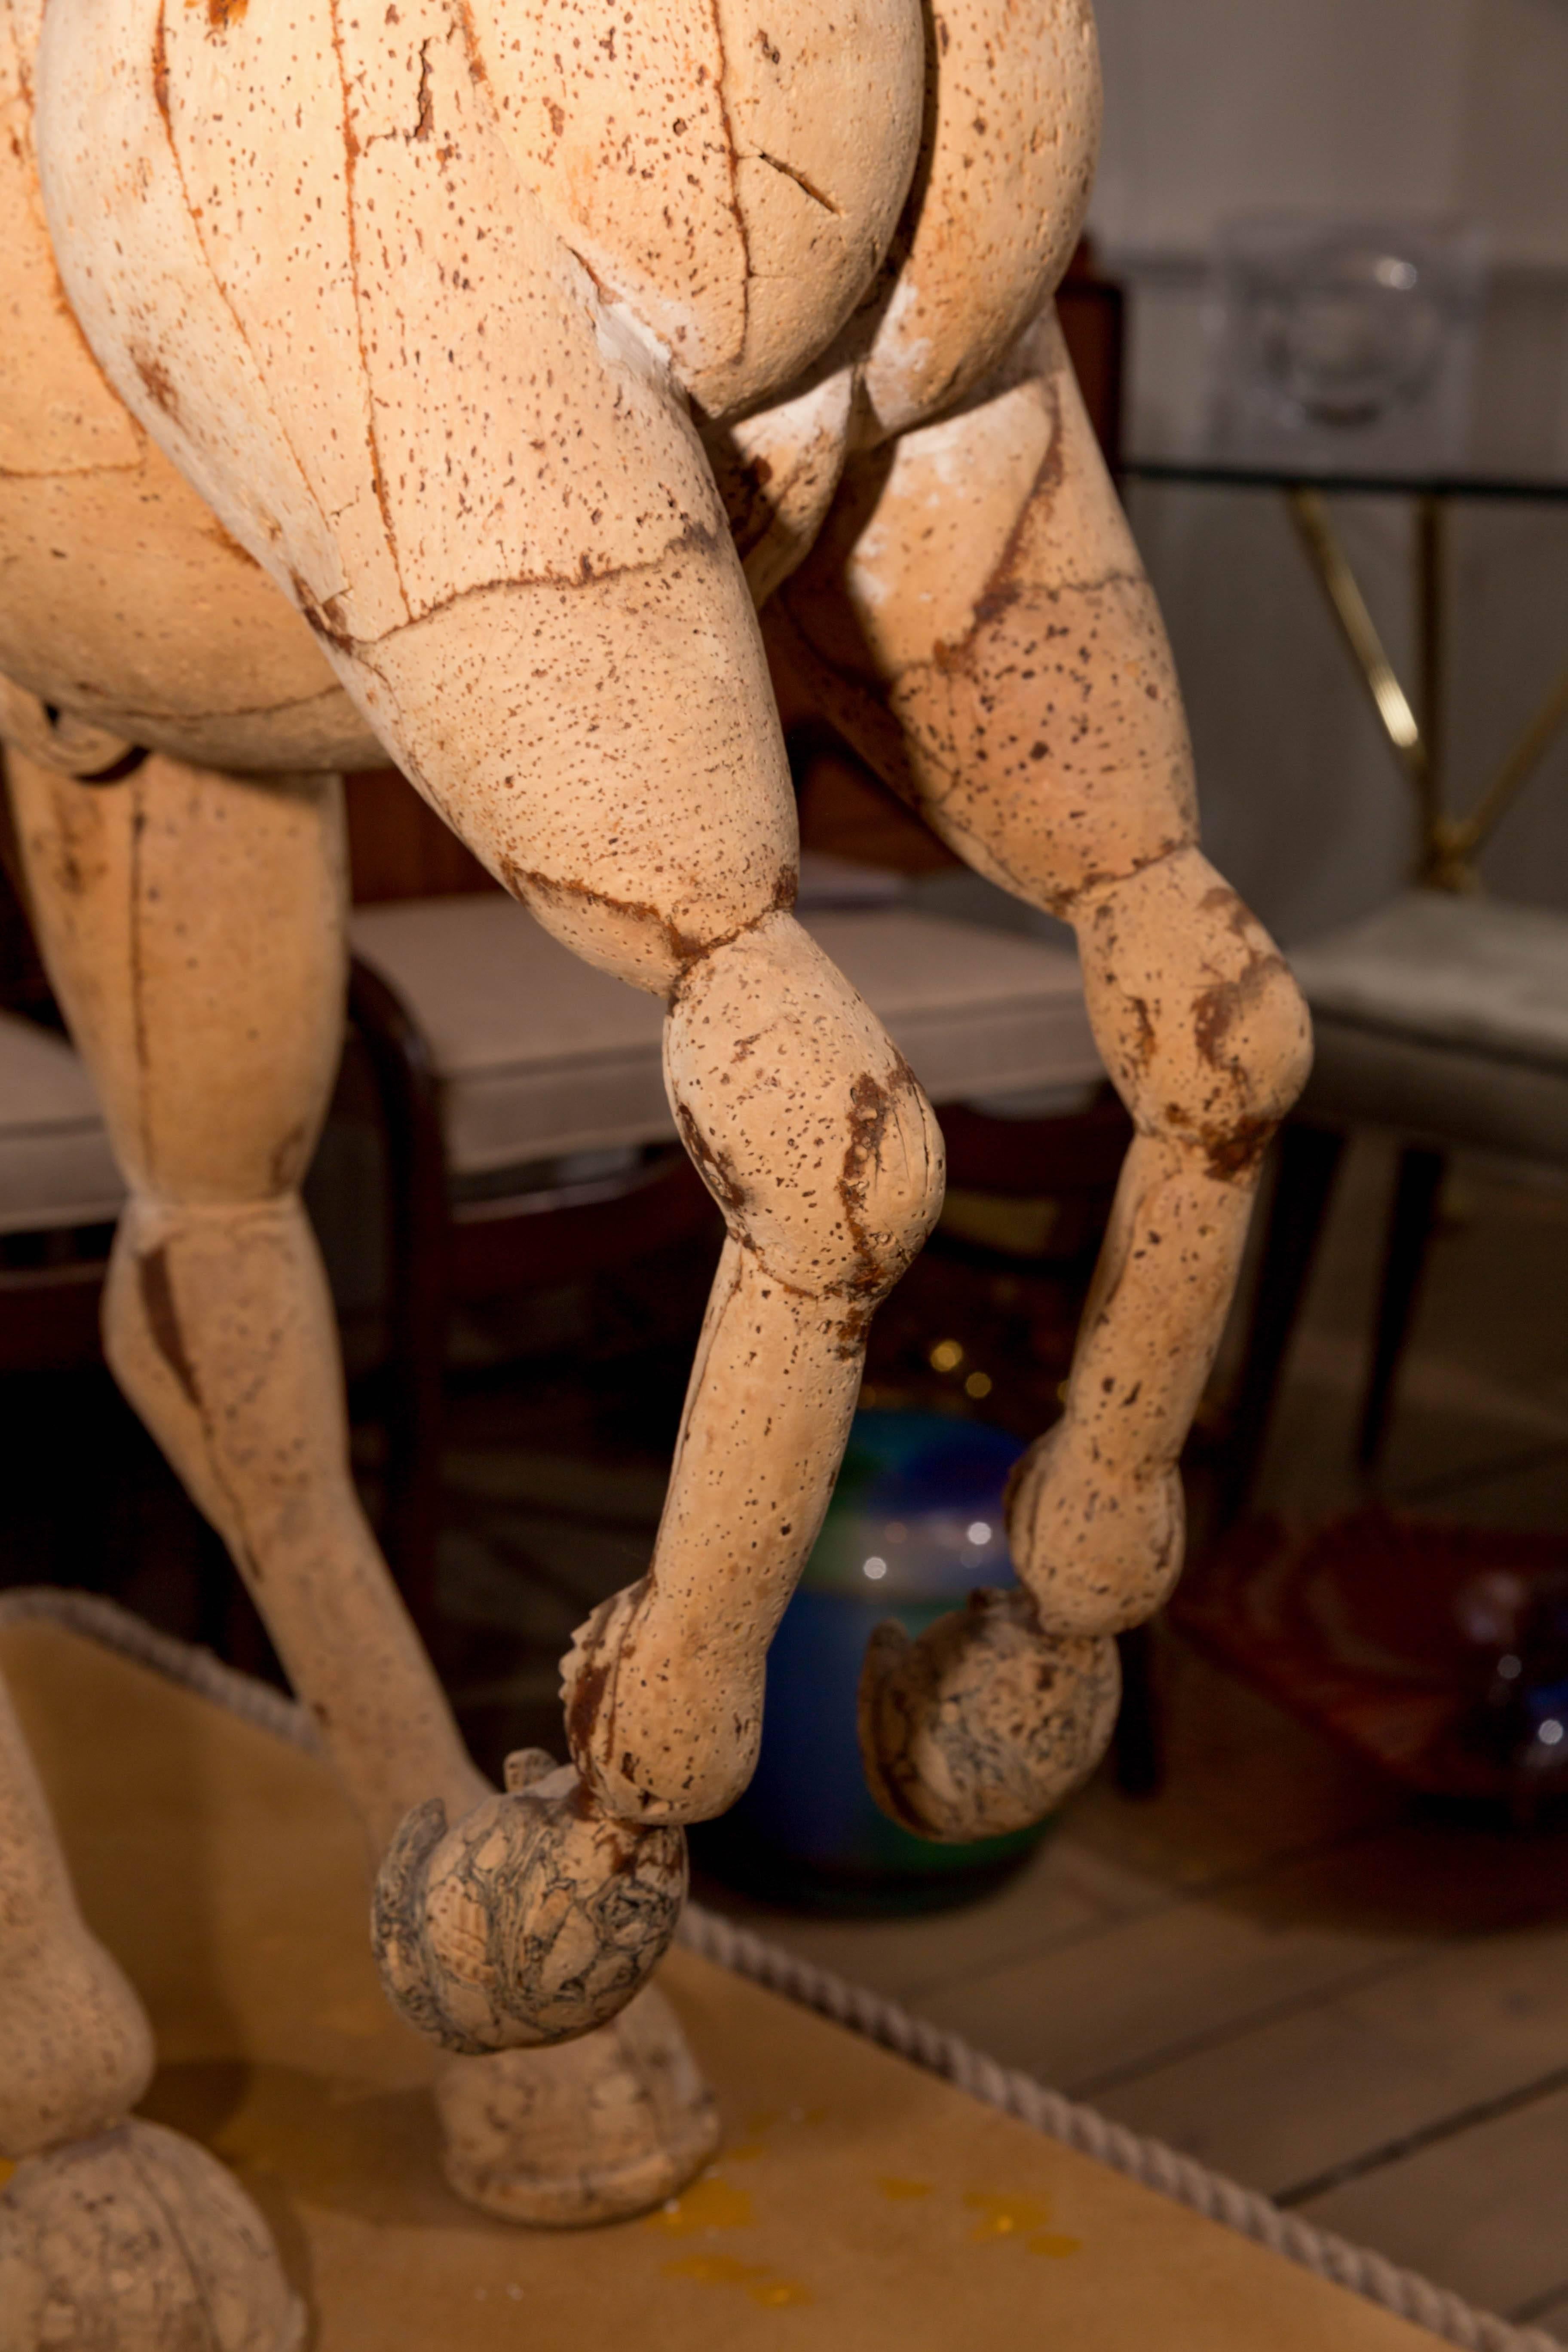 Centaur Sculpture of Cork and Nails on Pedestal by Janine Janet 2